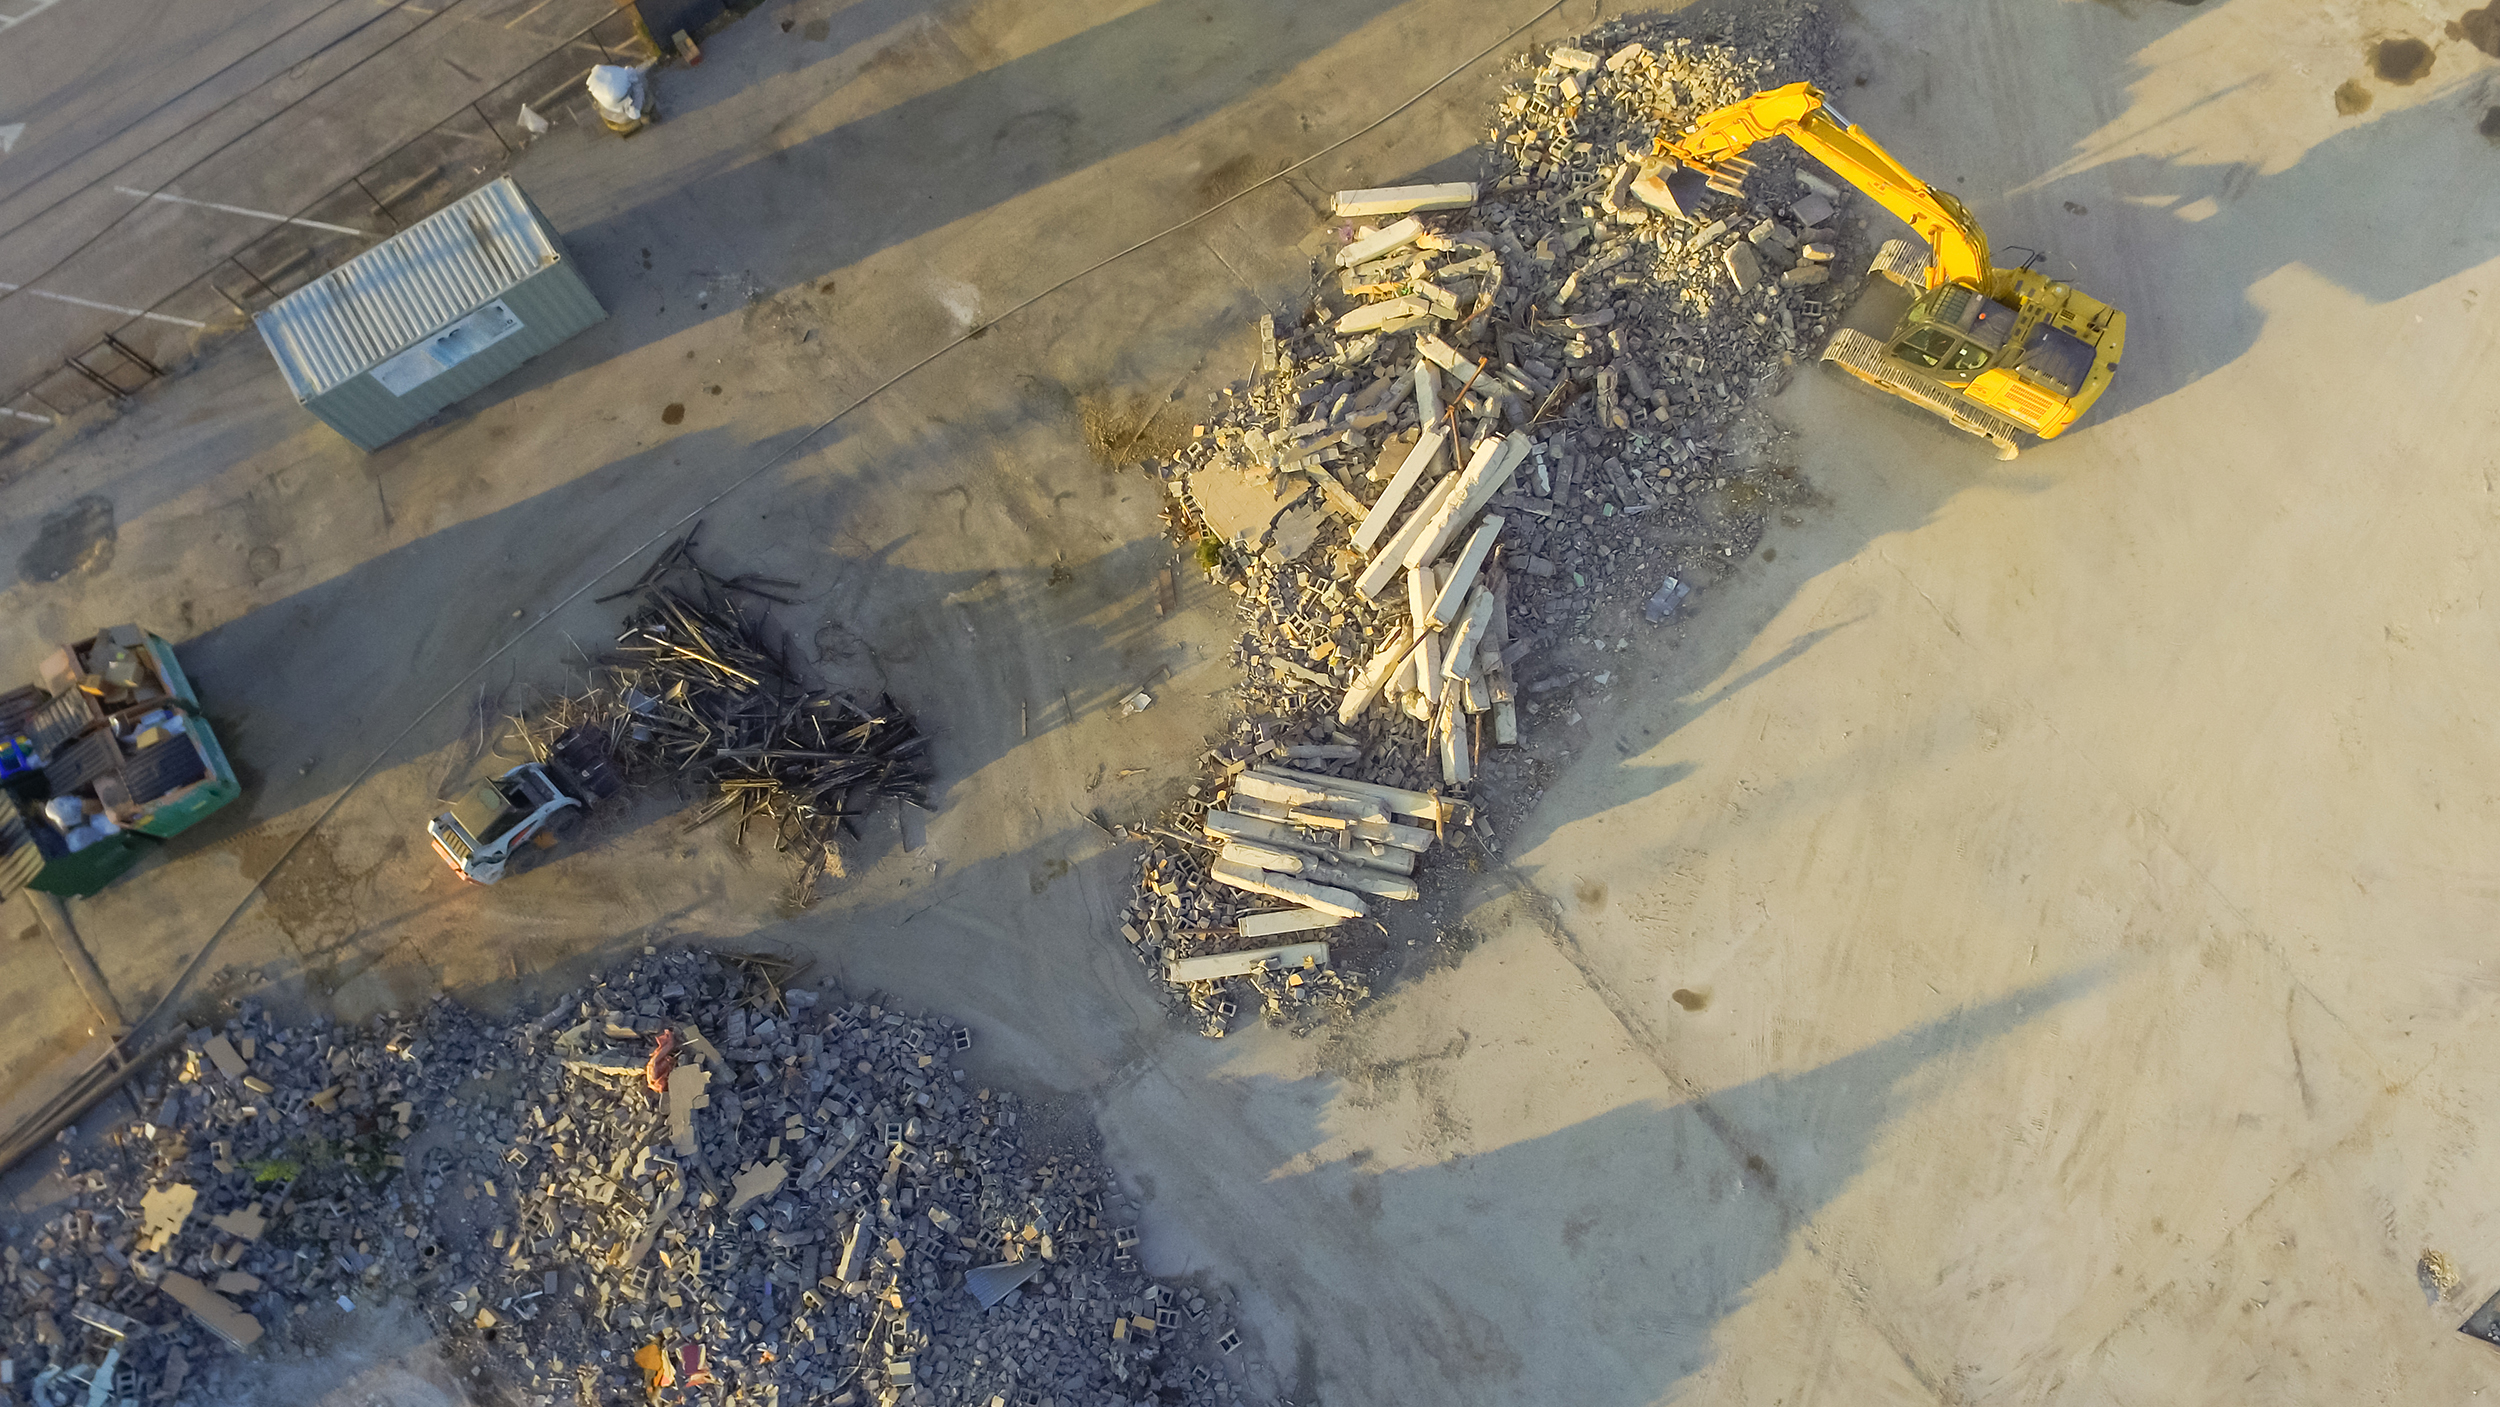 Aerial view construction site with rubble and scrap remaining after derelict building demolition. Hydraulic backhoe bulldozer removes crumbling demolished debris, brick, stone and concrete for recycle; Shutterstock ID 466308044; purchase_order: na; job: CJ_July_23; client: ; other: 